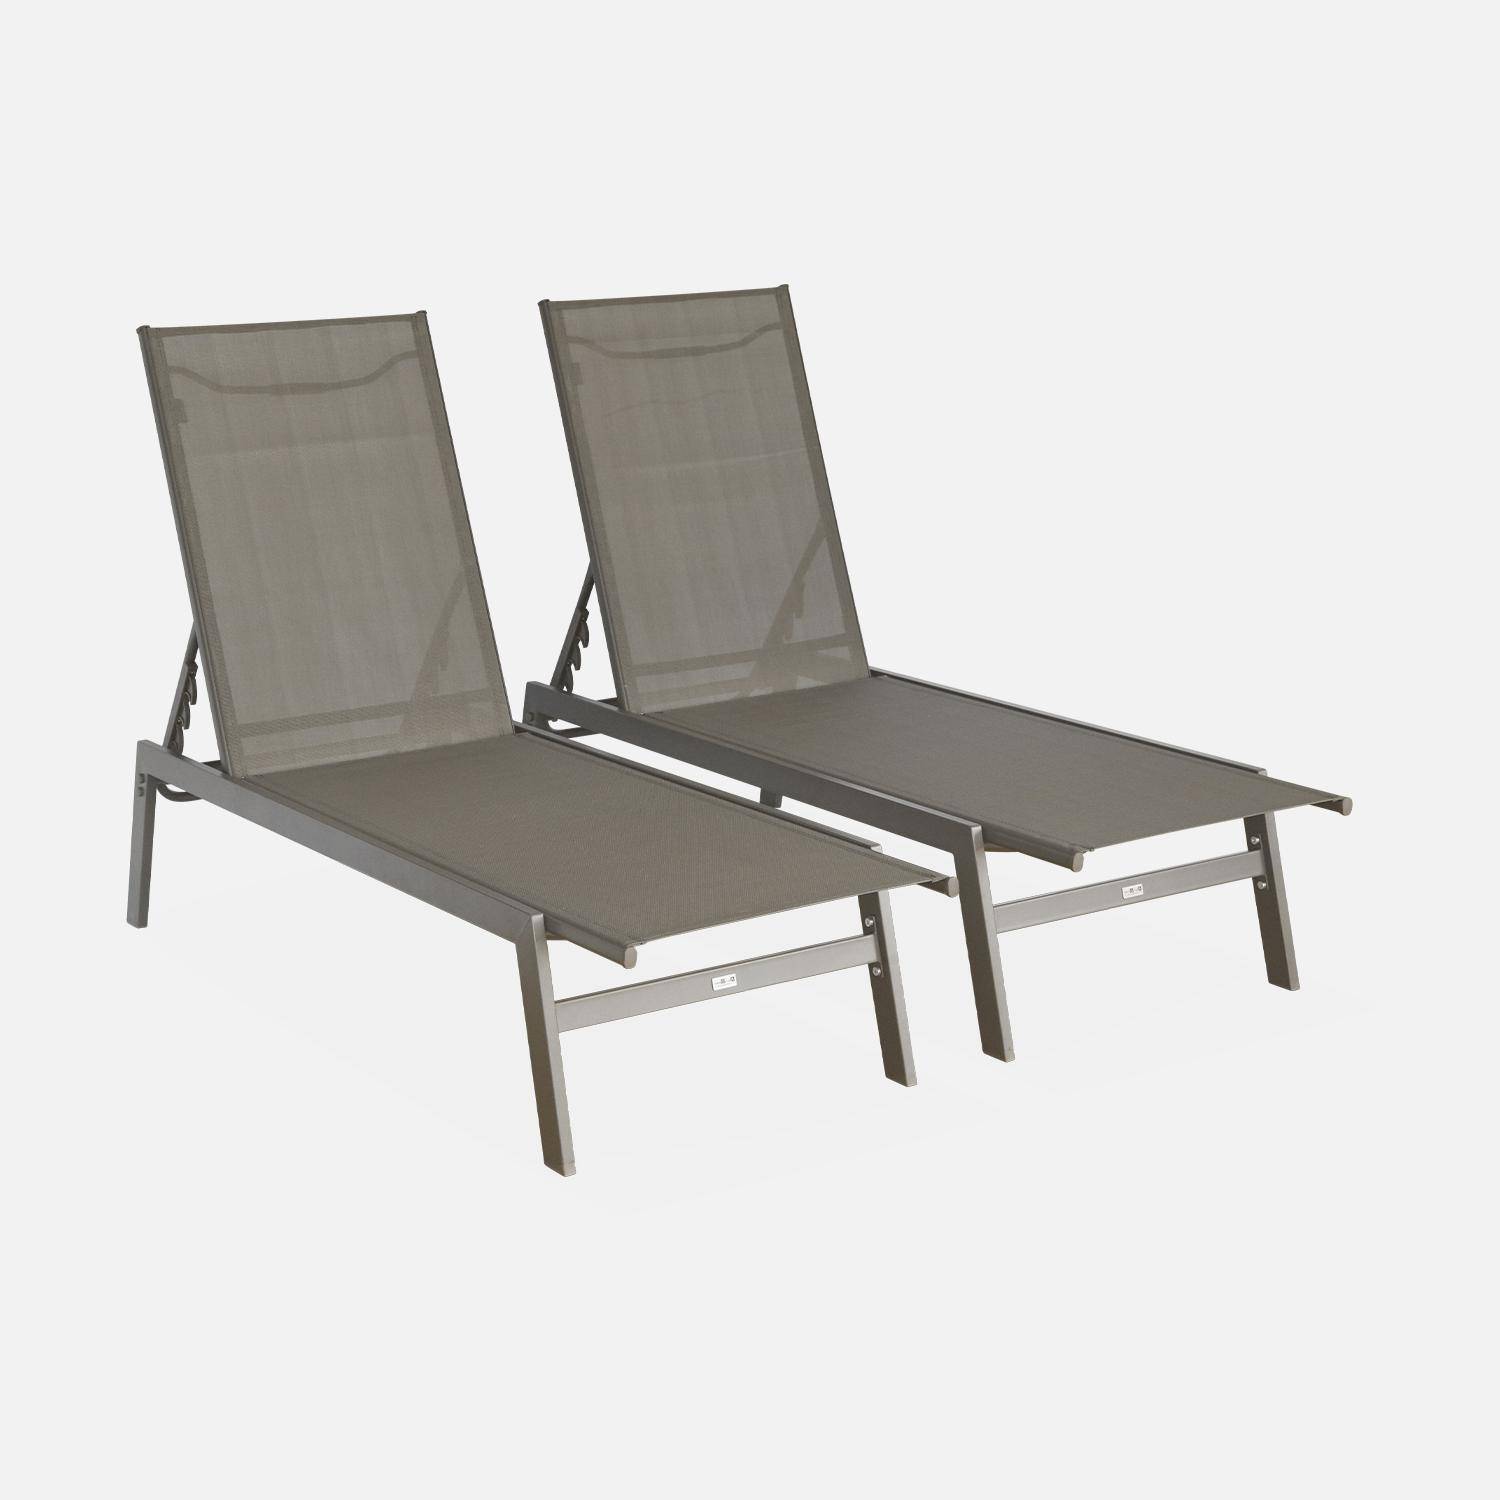 Pair of textilene and metal multi-position loungers, brown,sweeek,Photo3